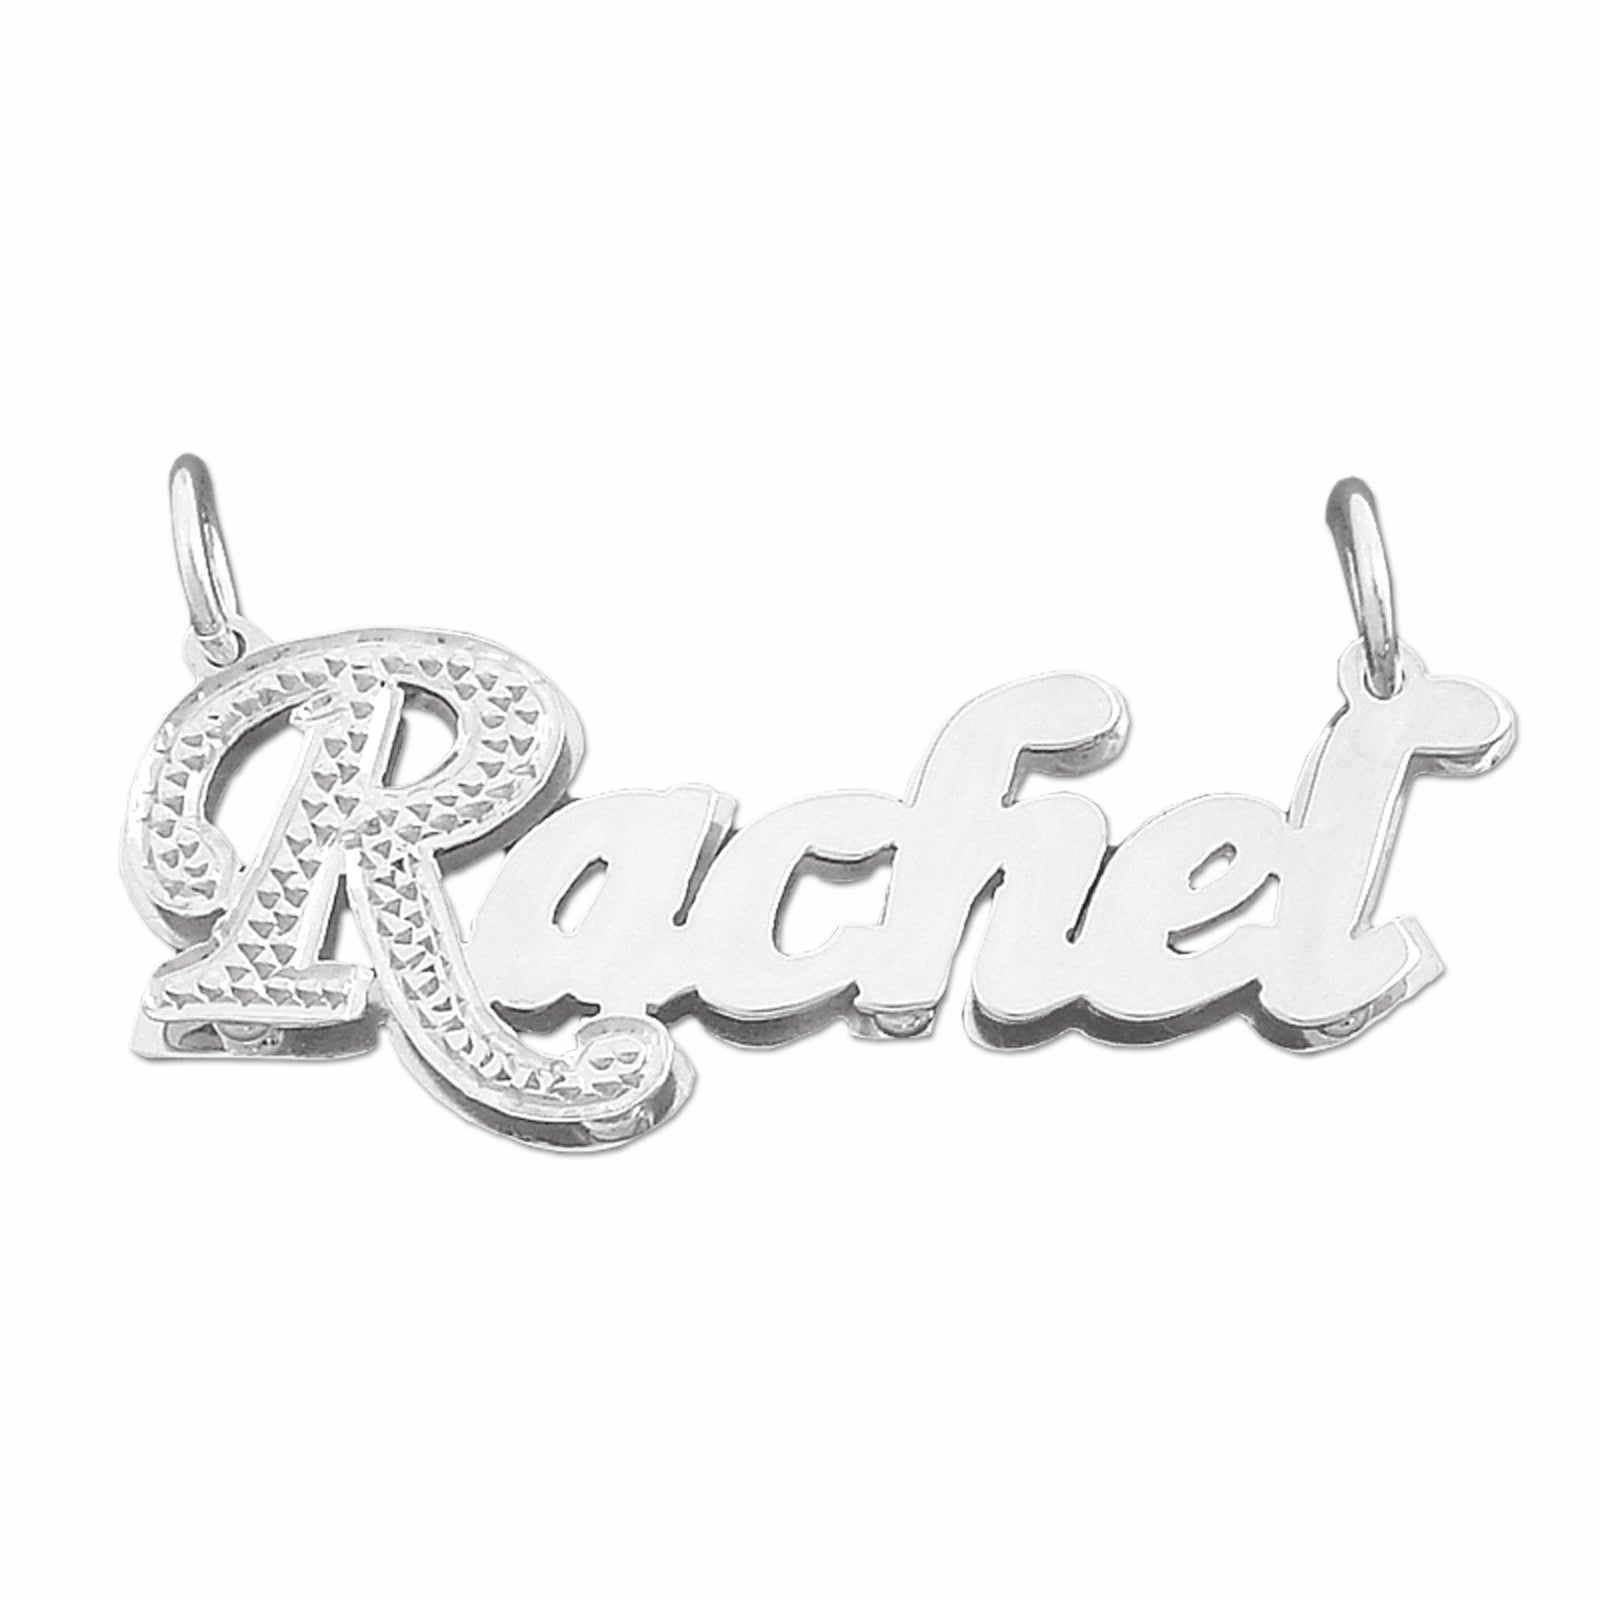 Small Size Silver Personalized Double Plate Script 3D Name Pendant Charm Necklace